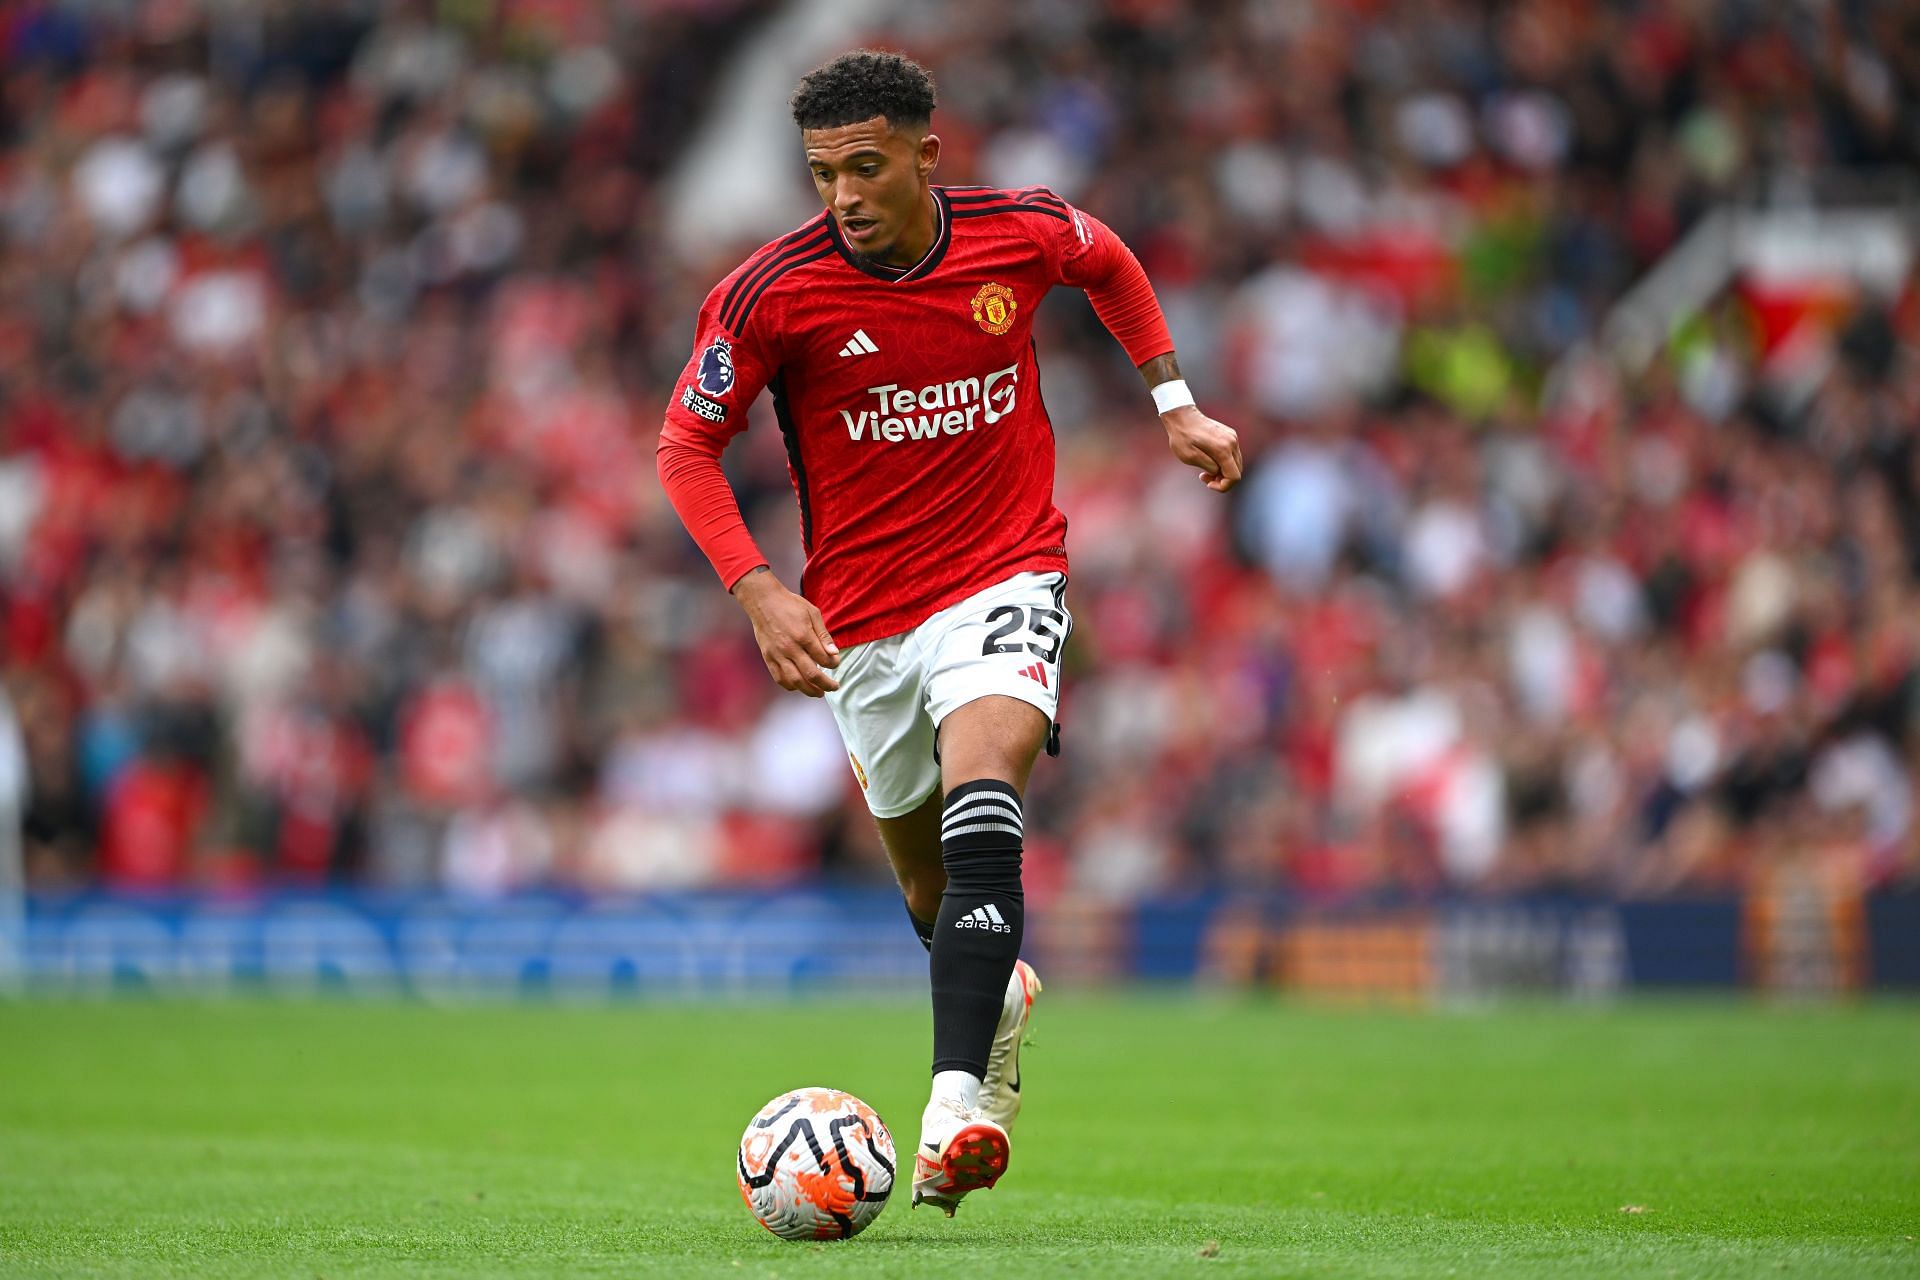 Jadon Sancho’s time at Old Trafford could be coming to an end